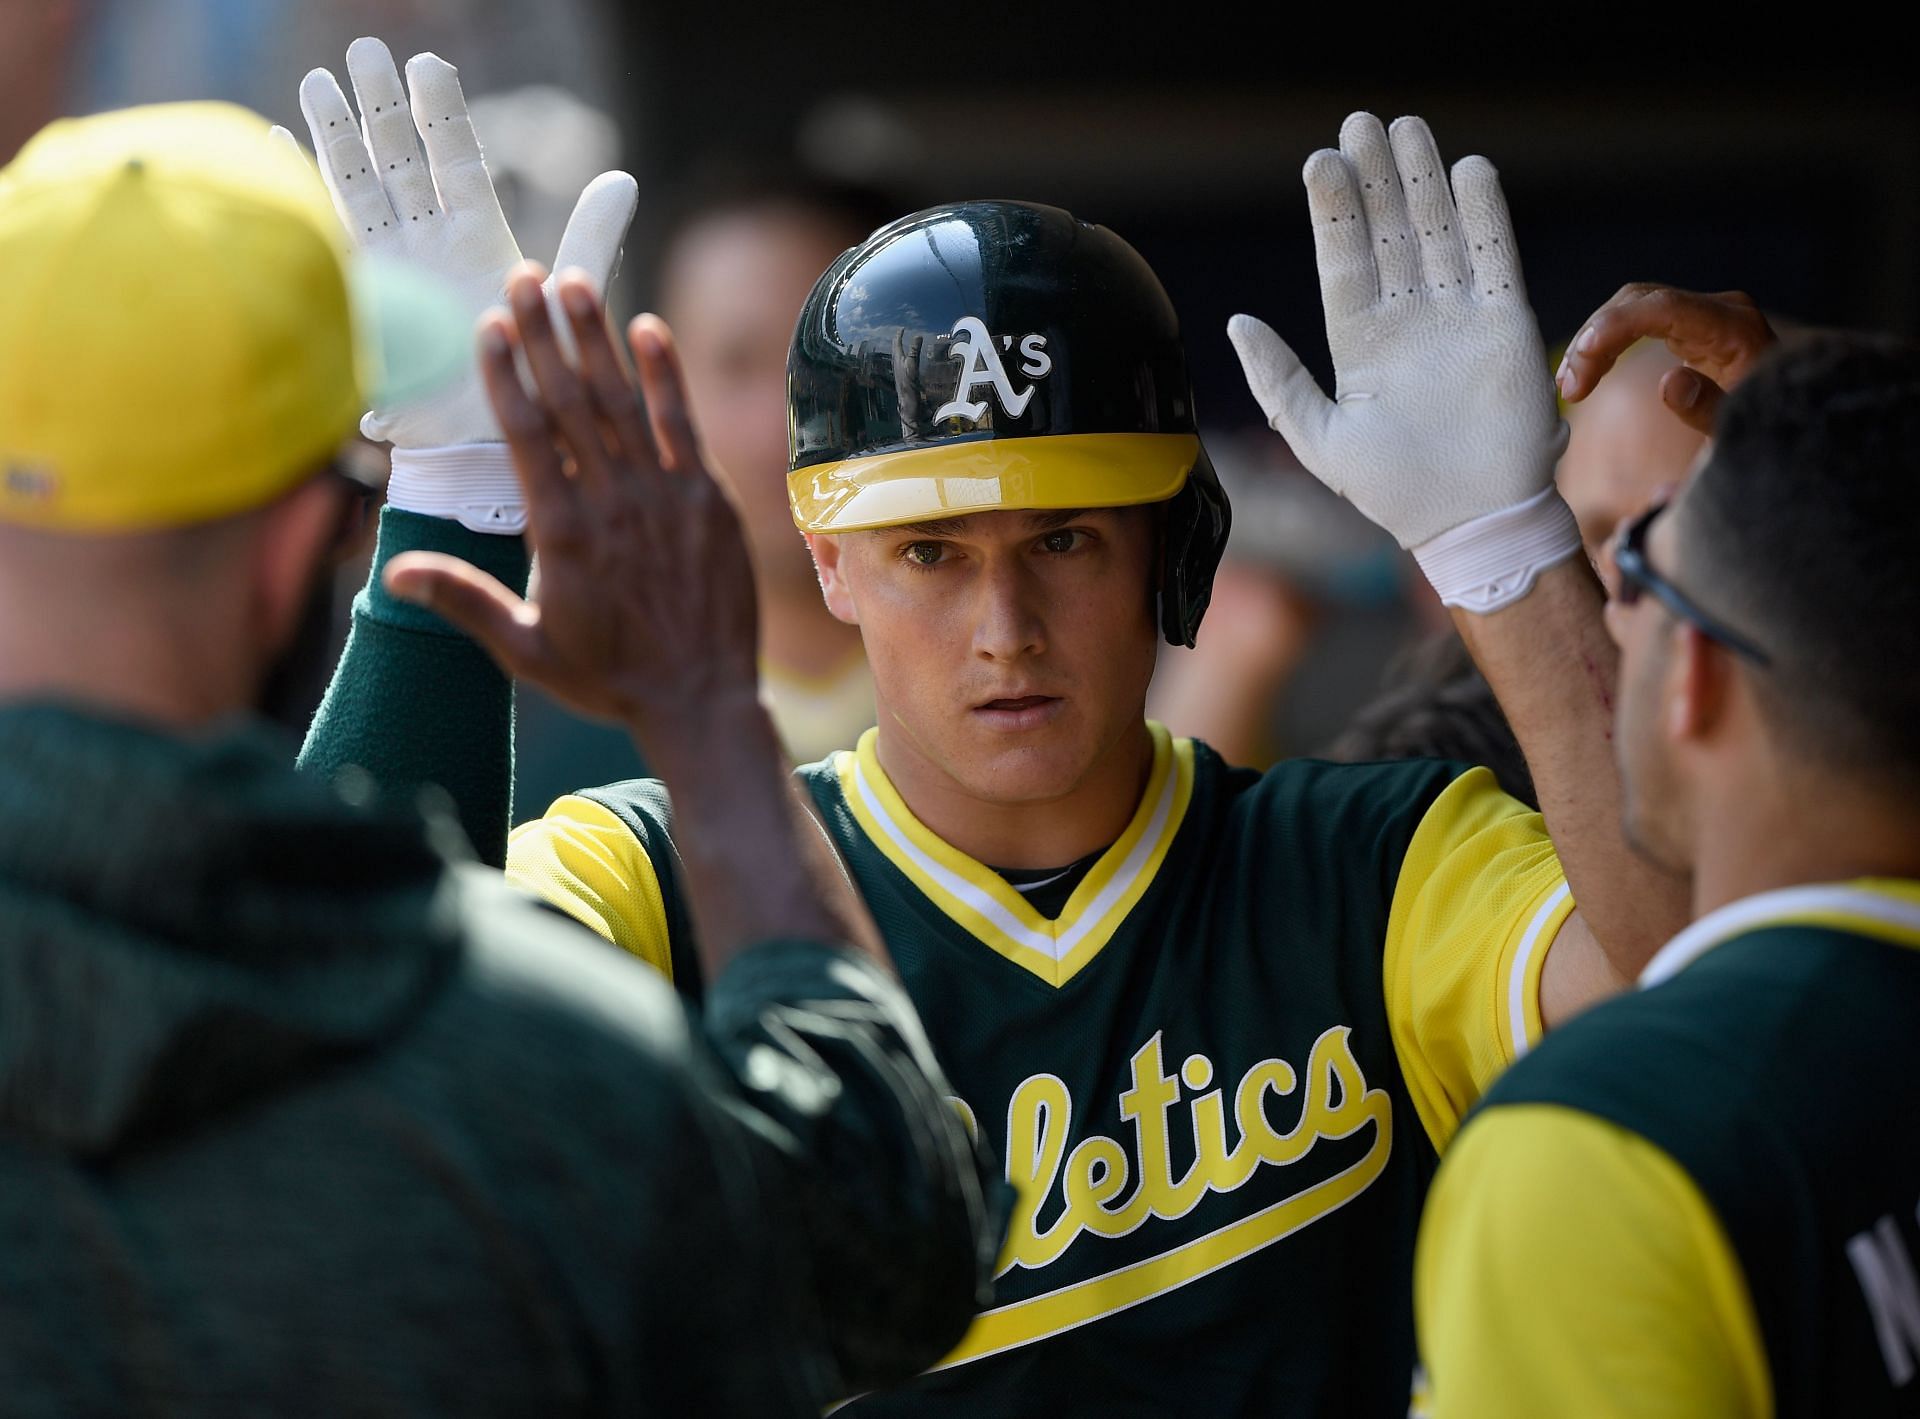 The San Francisco Giants have also been linked with interest to acquire the services of Matt Chapman